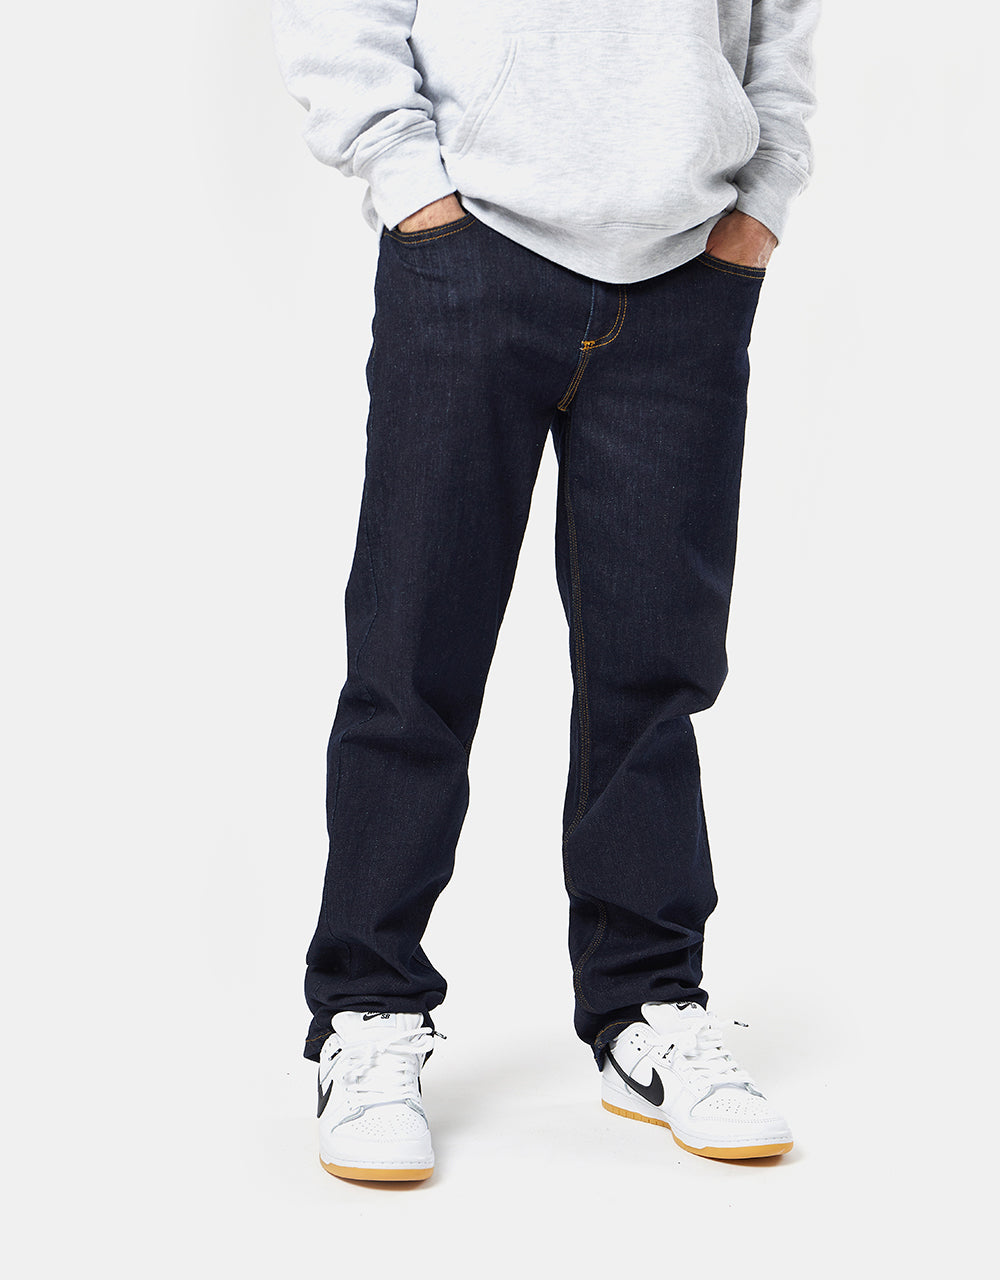 Route One Baggy Denim Jeans - Raw